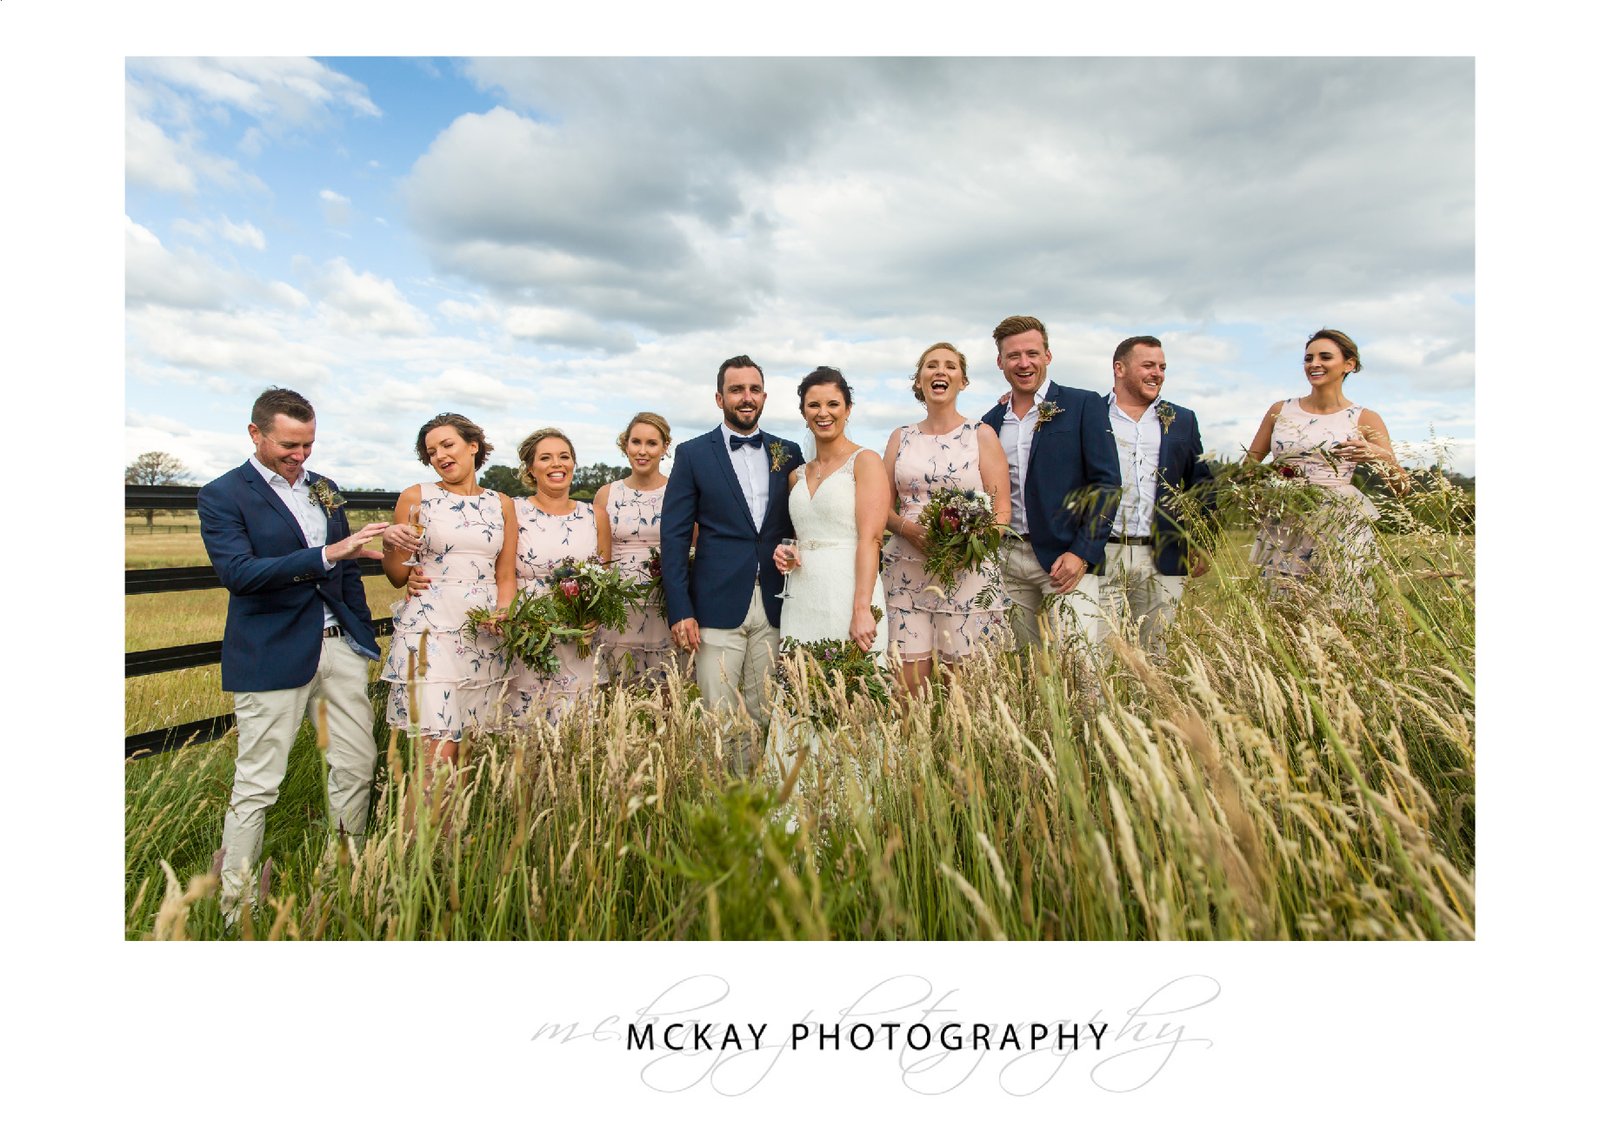 Bridal party is grass fields